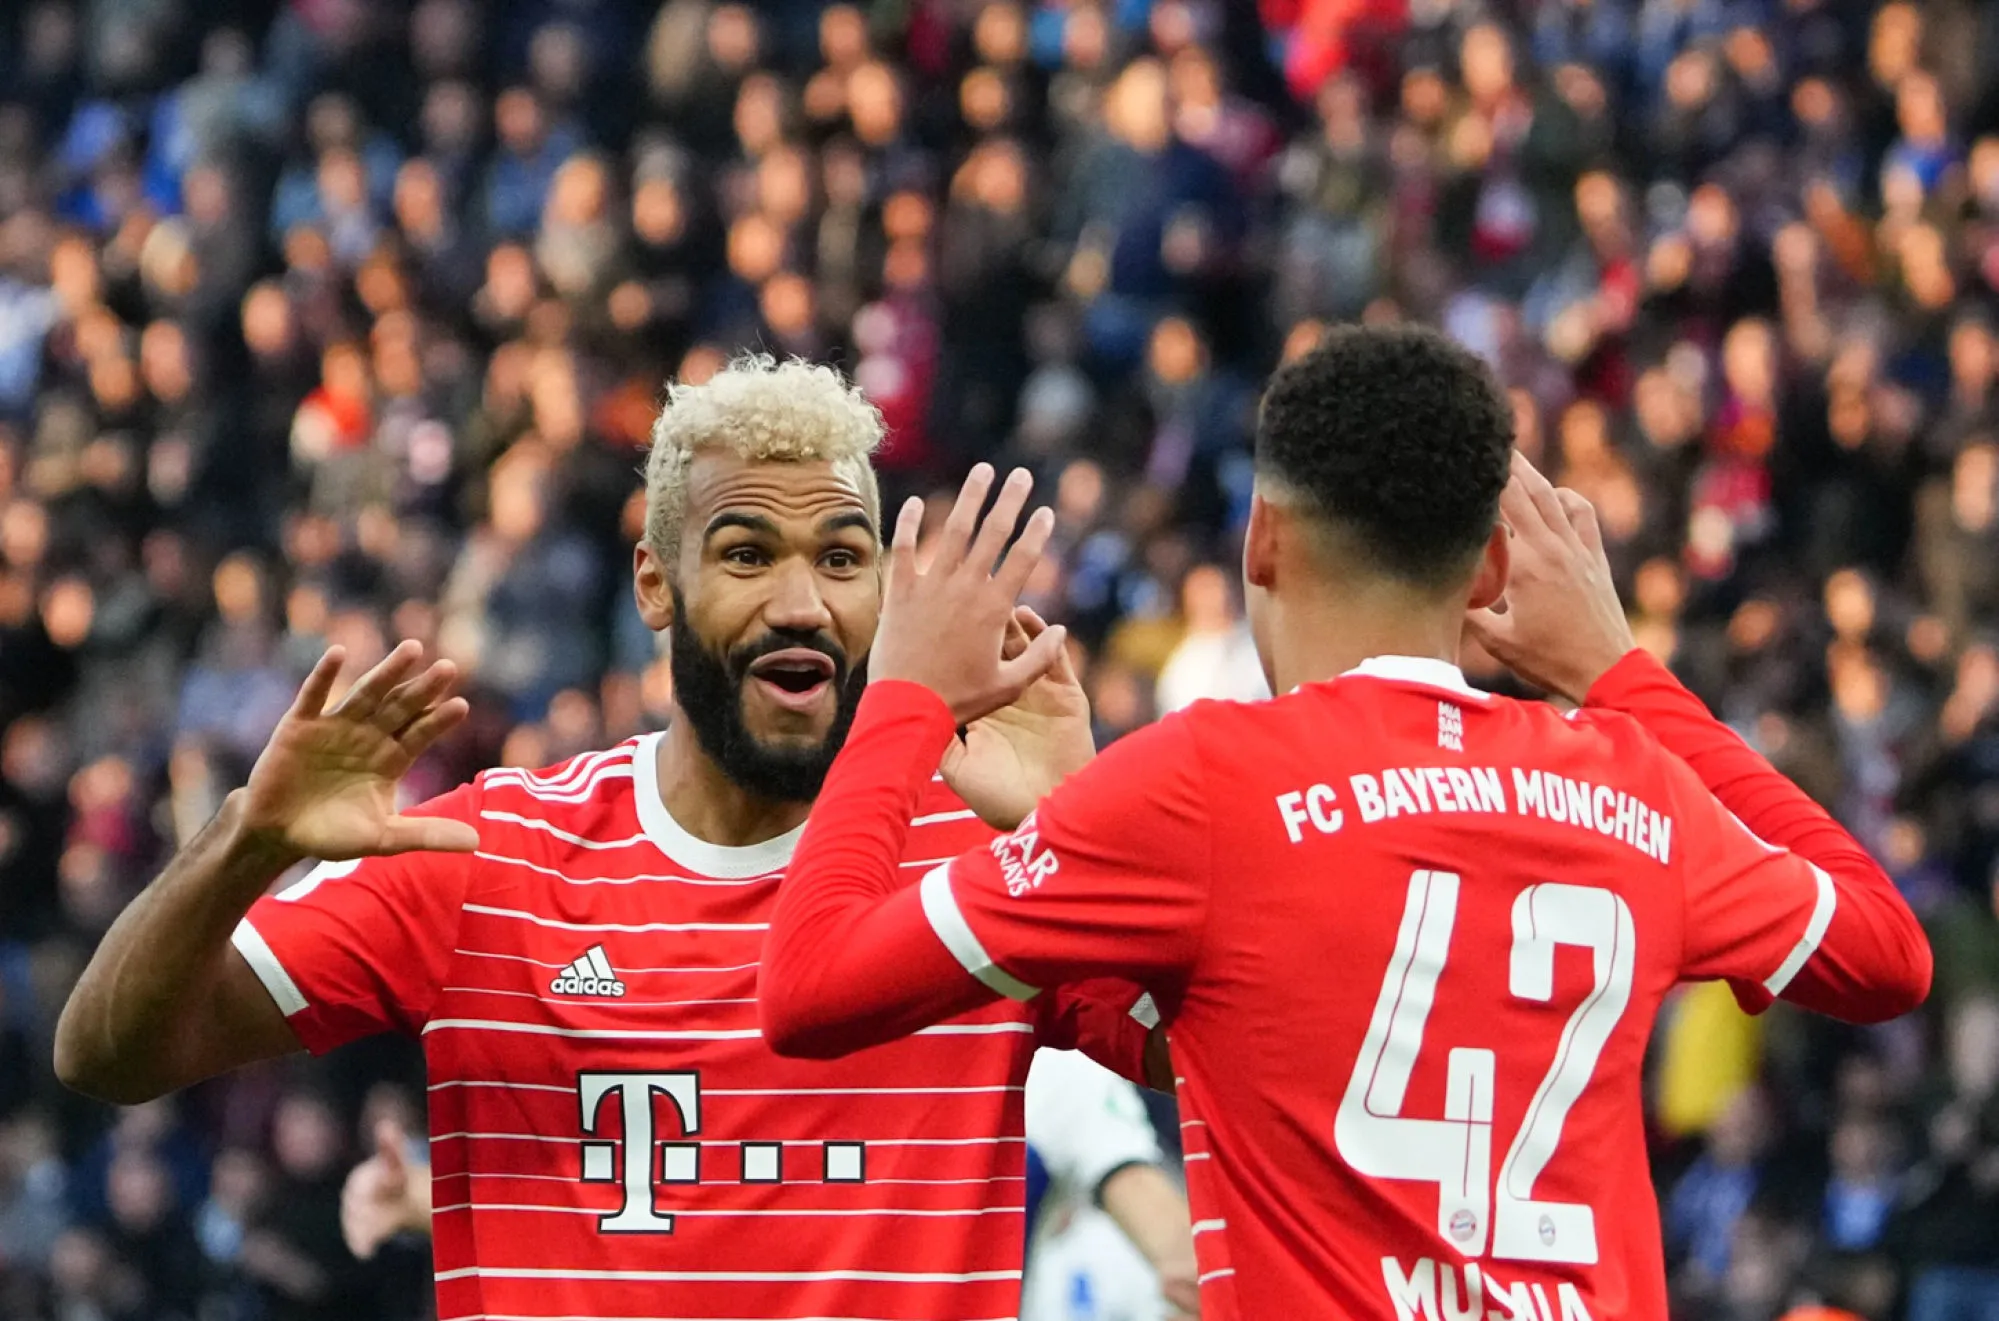 dpatop - 05 November 2022, Berlin: Soccer, Bundesliga, Hertha BSC - FC Bayern Munich, Matchday 13 at the Olympiastadion. Bayern's Jamal Musiala (r), scorer of the 0:1, celebrates with Bayern's Eric Maxim Choupo-Moting after his goal. Photo: Soeren Stache/dpa - IMPORTANT NOTE: In accordance with the requirements of the DFL Deutsche Fußball Liga and the DFB Deutscher Fußball-Bund, it is prohibited to use or have used photographs taken in the stadium and/or of the match in the form of sequence pictures and/or video-like photo series. - Photo by Icon sport